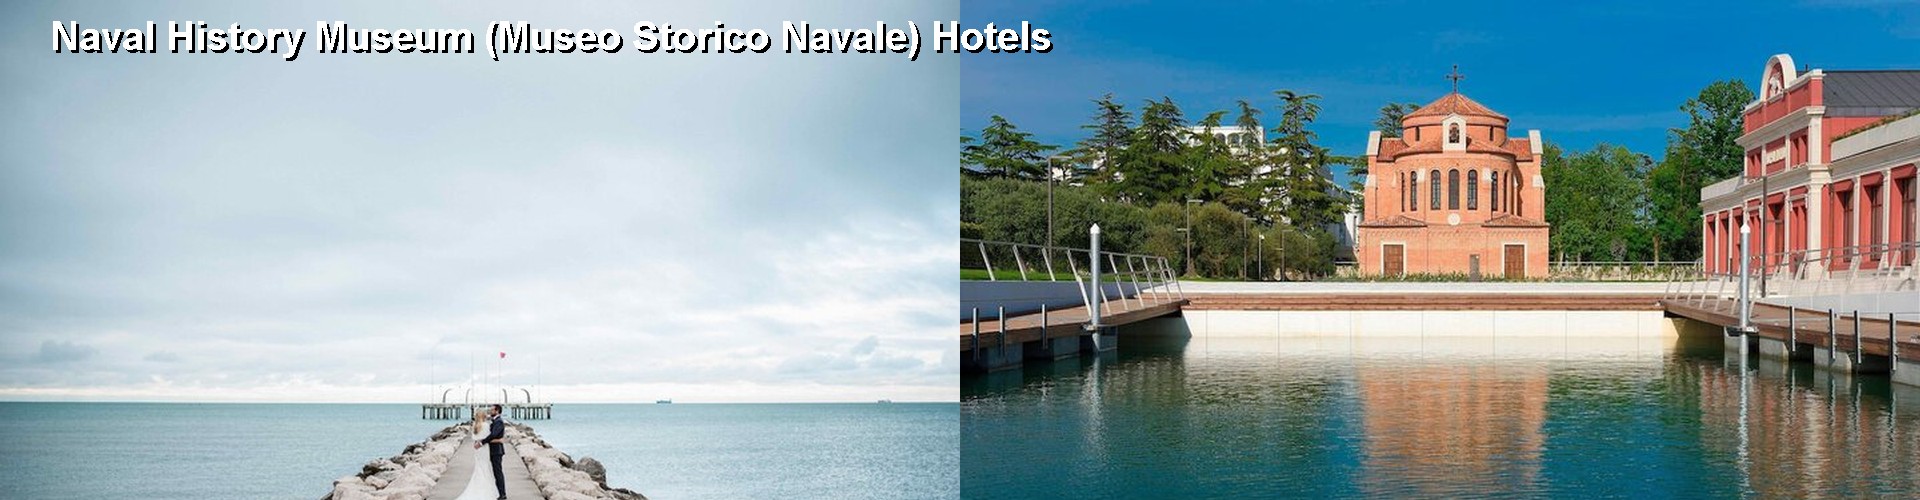 5 Best Hotels near Naval History Museum (Museo Storico Navale)